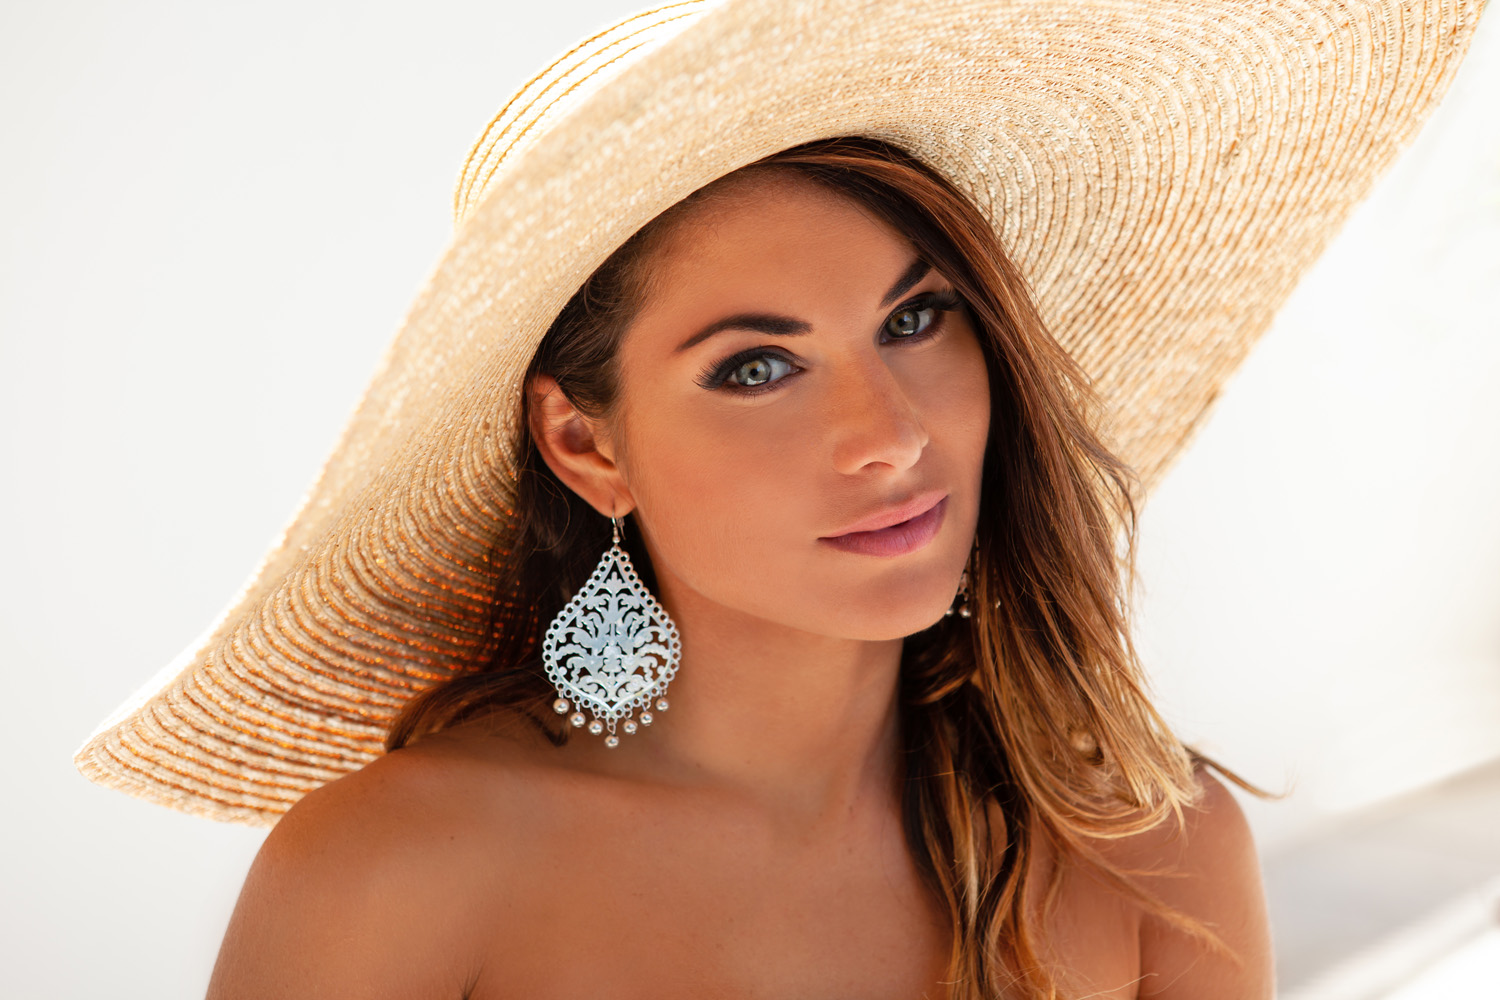 Model in a hat with earrings, fitness model with green eyes, fitness model in a bikini, qca photographer, queensland college of art photography graduate, queensland college of art photography, queensland college of art masters degree, queensland college of art graduate, model sitting at the pool, gold coast swimwear photography, gold coast model photography, instagram model photography, gold coast instagram model, gold coast instagram photography, gold coast fashion photography, lana noir, surfers paradise photography, broadbeach photographer, robina photographer, professional model photography, gold coast professional model, gold coast lifestyle photography, gold coast fitness photography, gold coast health photography, gold coast healthy living, gold coast healthy lifestyle; gold coast fitness